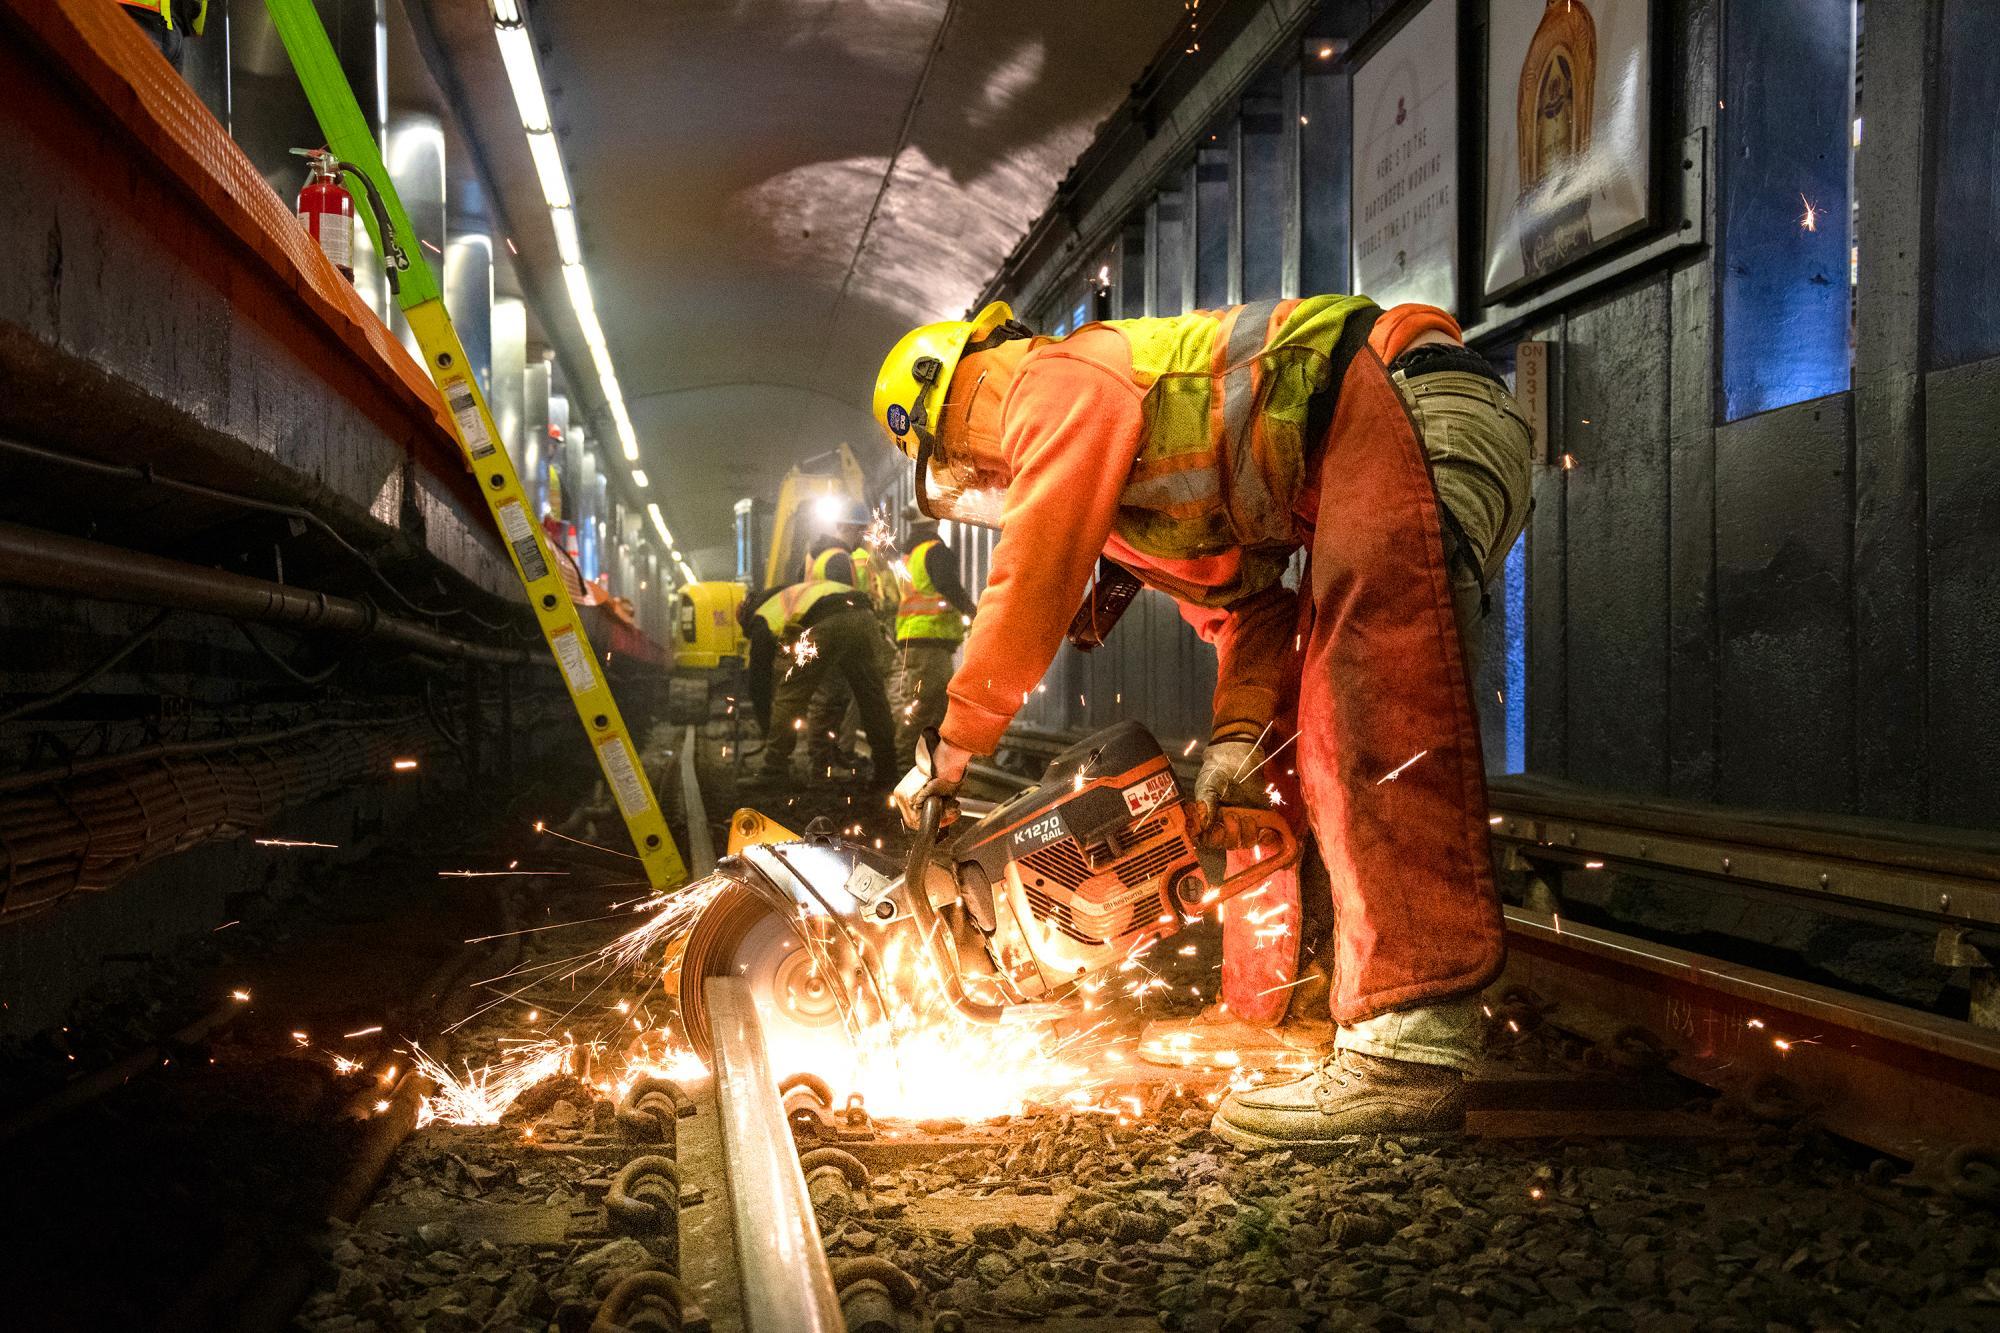 A crew member cuts track at Haymarket as part of rail replacement during the first Orange Line weekend shutdown of 2020